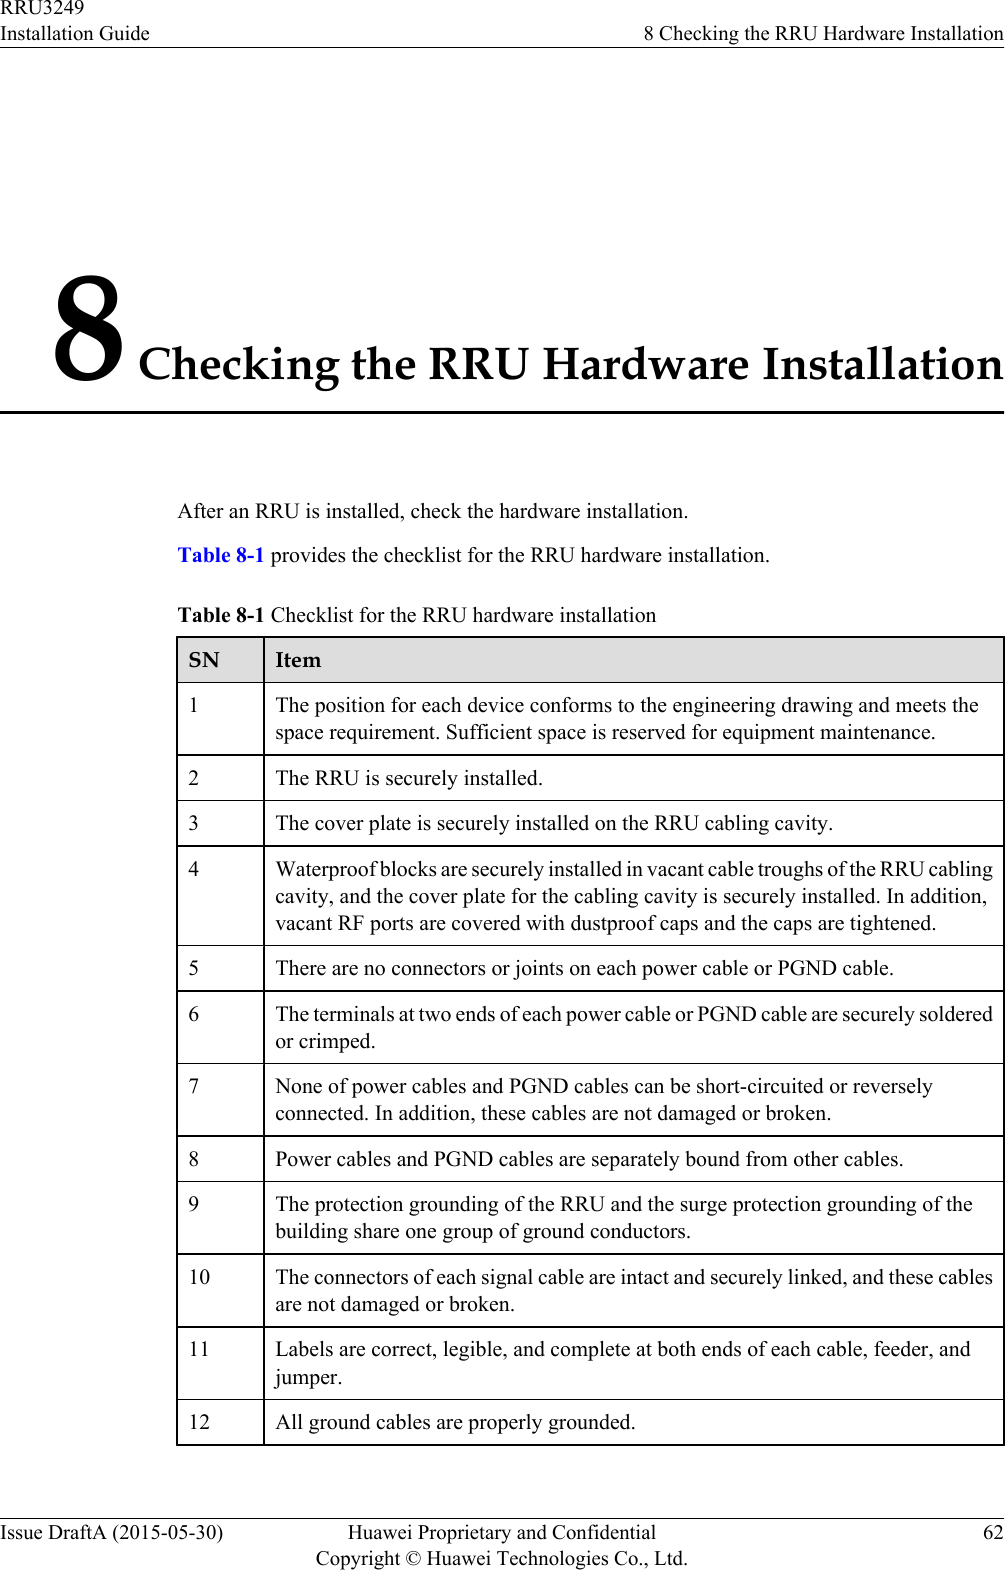 8 Checking the RRU Hardware InstallationAfter an RRU is installed, check the hardware installation.Table 8-1 provides the checklist for the RRU hardware installation.Table 8-1 Checklist for the RRU hardware installationSN Item1The position for each device conforms to the engineering drawing and meets thespace requirement. Sufficient space is reserved for equipment maintenance.2 The RRU is securely installed.3 The cover plate is securely installed on the RRU cabling cavity.4 Waterproof blocks are securely installed in vacant cable troughs of the RRU cablingcavity, and the cover plate for the cabling cavity is securely installed. In addition,vacant RF ports are covered with dustproof caps and the caps are tightened.5 There are no connectors or joints on each power cable or PGND cable.6 The terminals at two ends of each power cable or PGND cable are securely solderedor crimped.7 None of power cables and PGND cables can be short-circuited or reverselyconnected. In addition, these cables are not damaged or broken.8 Power cables and PGND cables are separately bound from other cables.9 The protection grounding of the RRU and the surge protection grounding of thebuilding share one group of ground conductors.10 The connectors of each signal cable are intact and securely linked, and these cablesare not damaged or broken.11 Labels are correct, legible, and complete at both ends of each cable, feeder, andjumper.12 All ground cables are properly grounded.RRU3249Installation Guide 8 Checking the RRU Hardware InstallationIssue DraftA (2015-05-30) Huawei Proprietary and ConfidentialCopyright © Huawei Technologies Co., Ltd.62